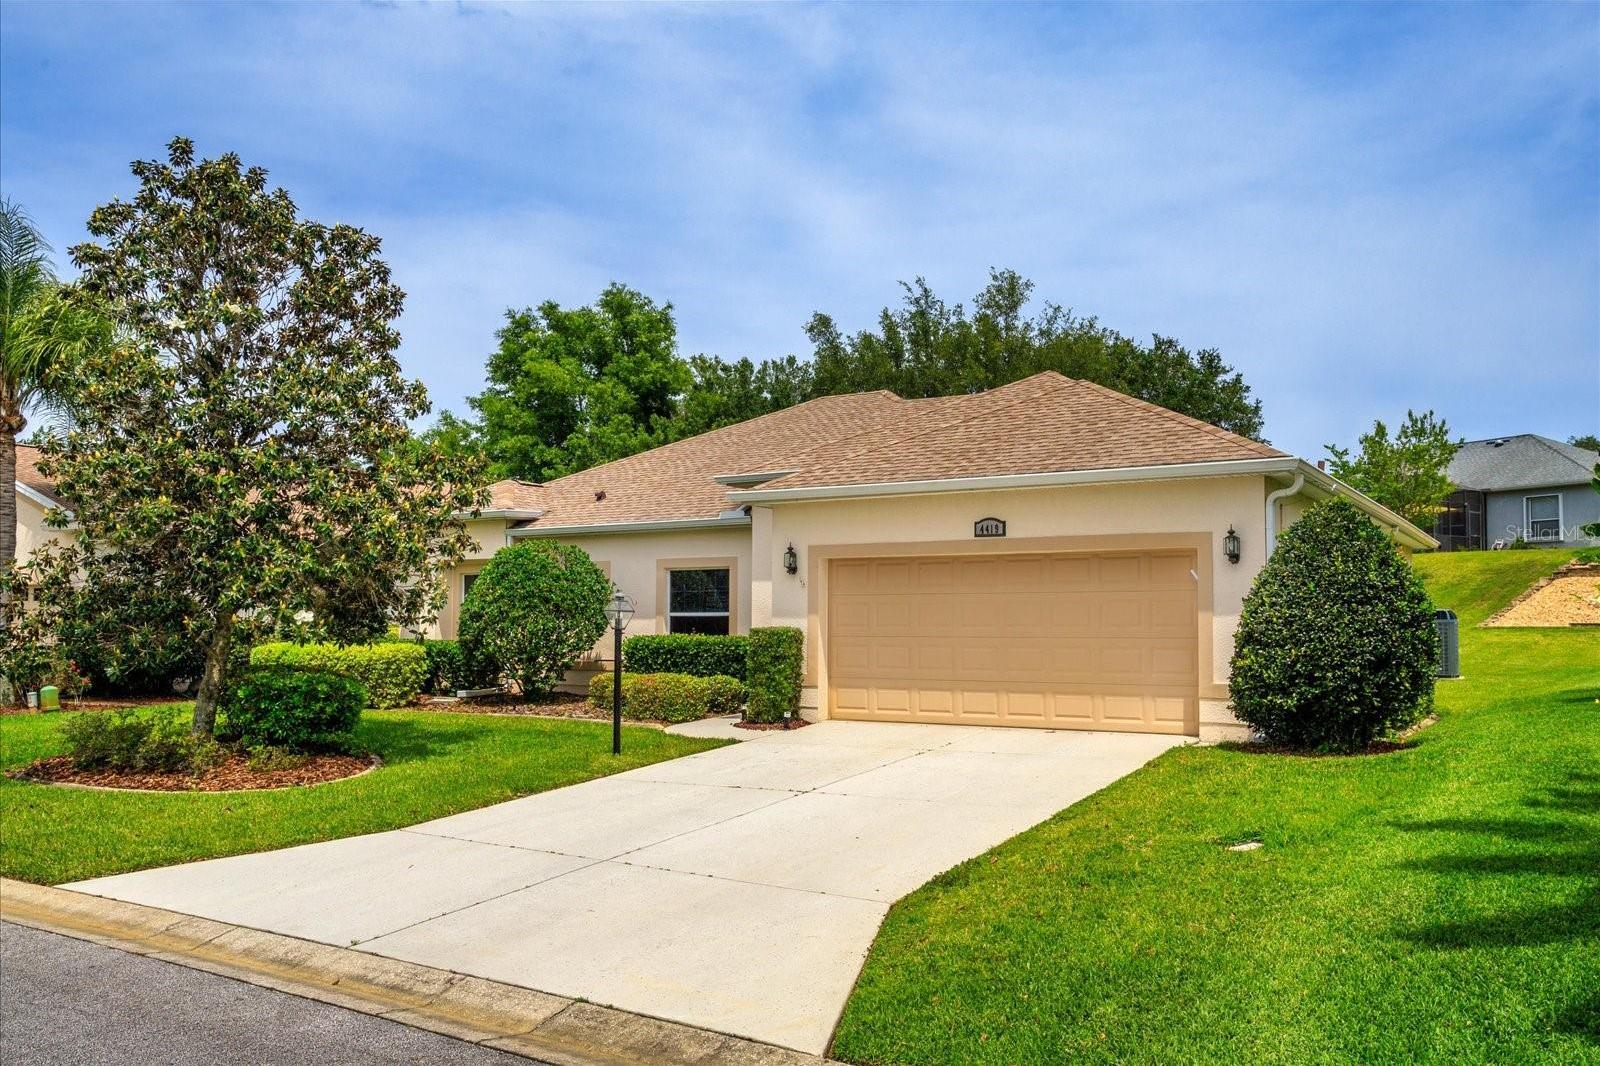 Photo one of 4419 Nottoway Dr Leesburg FL 34748 | MLS G5079482